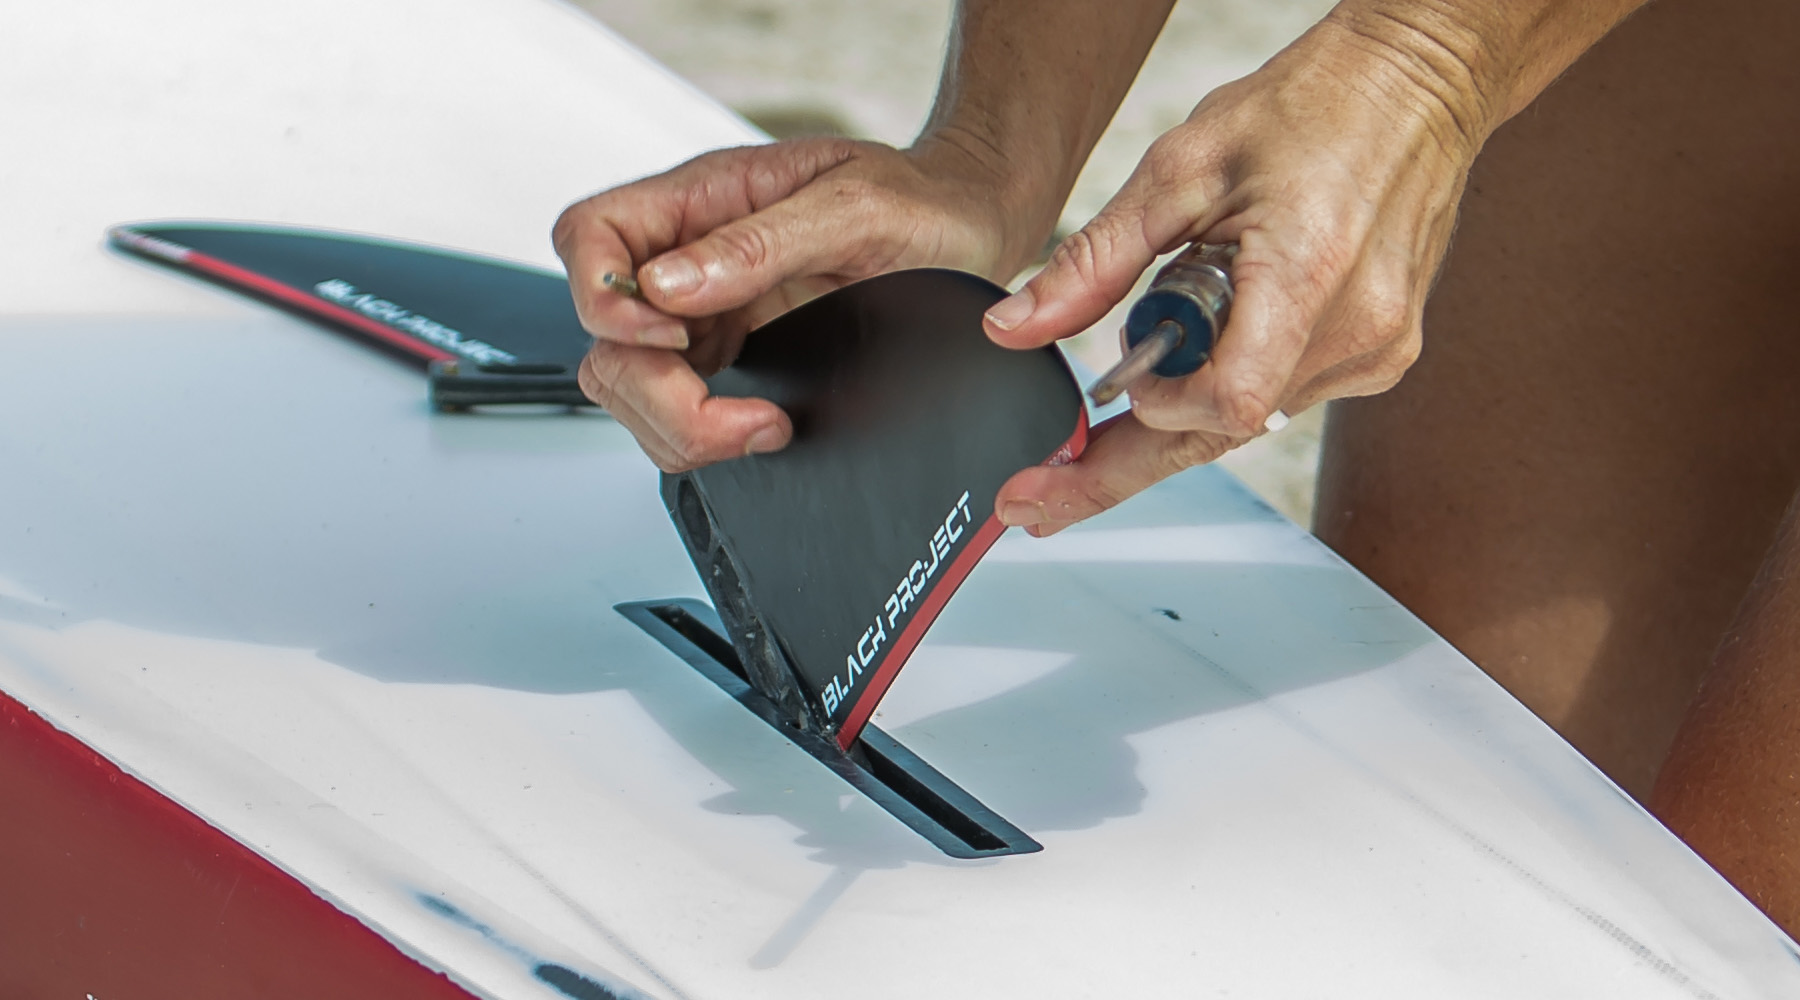 Step #5 - Which fin base option do I need for my board?